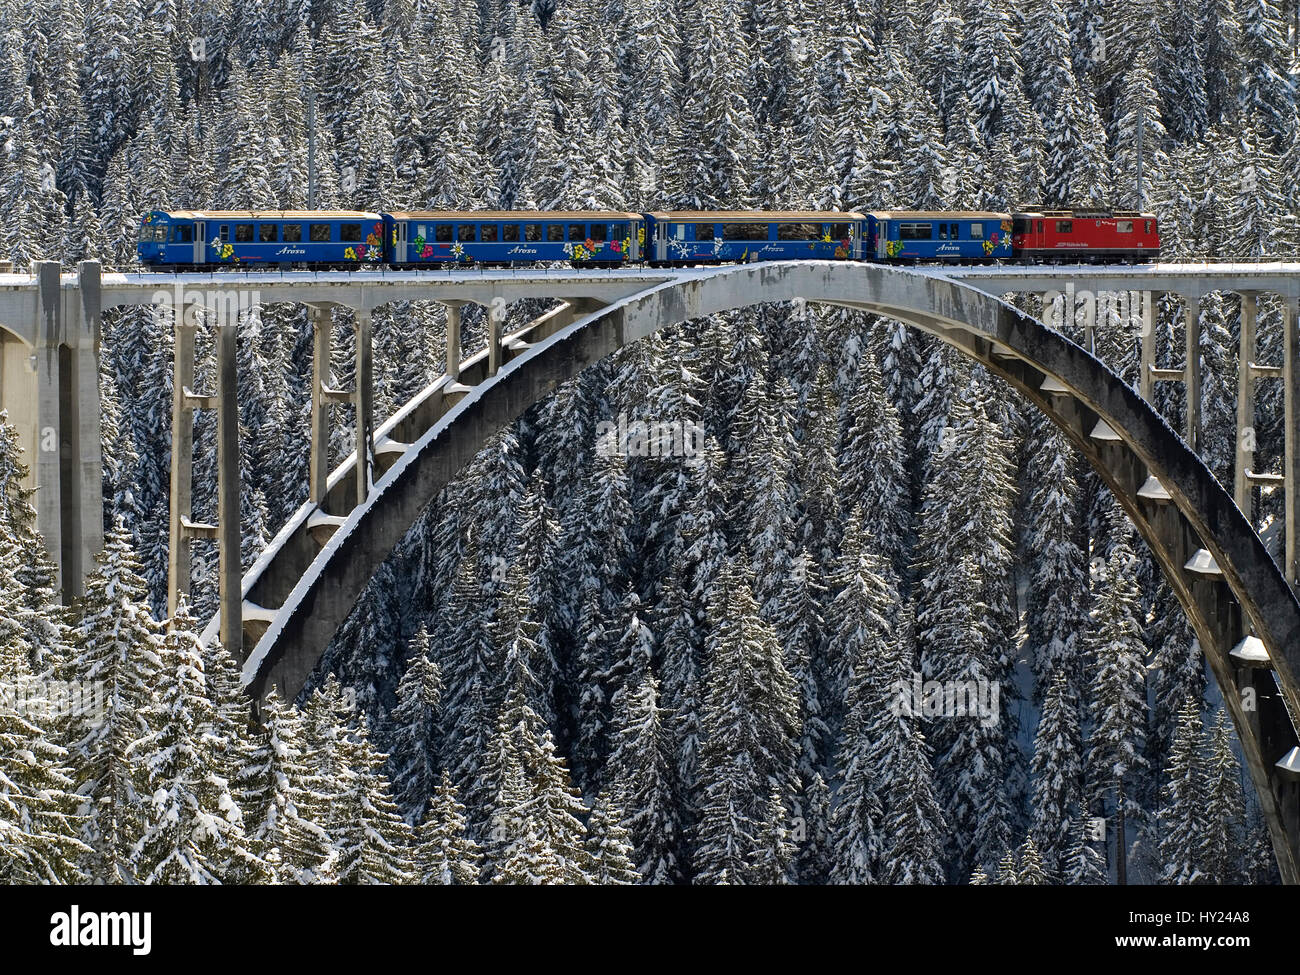 This stock photo shows the Arosa train on the Langwies Bridge in a beautiful mountain landscape near Arosa a ski resort in Switzerland. The image was  Stock Photo